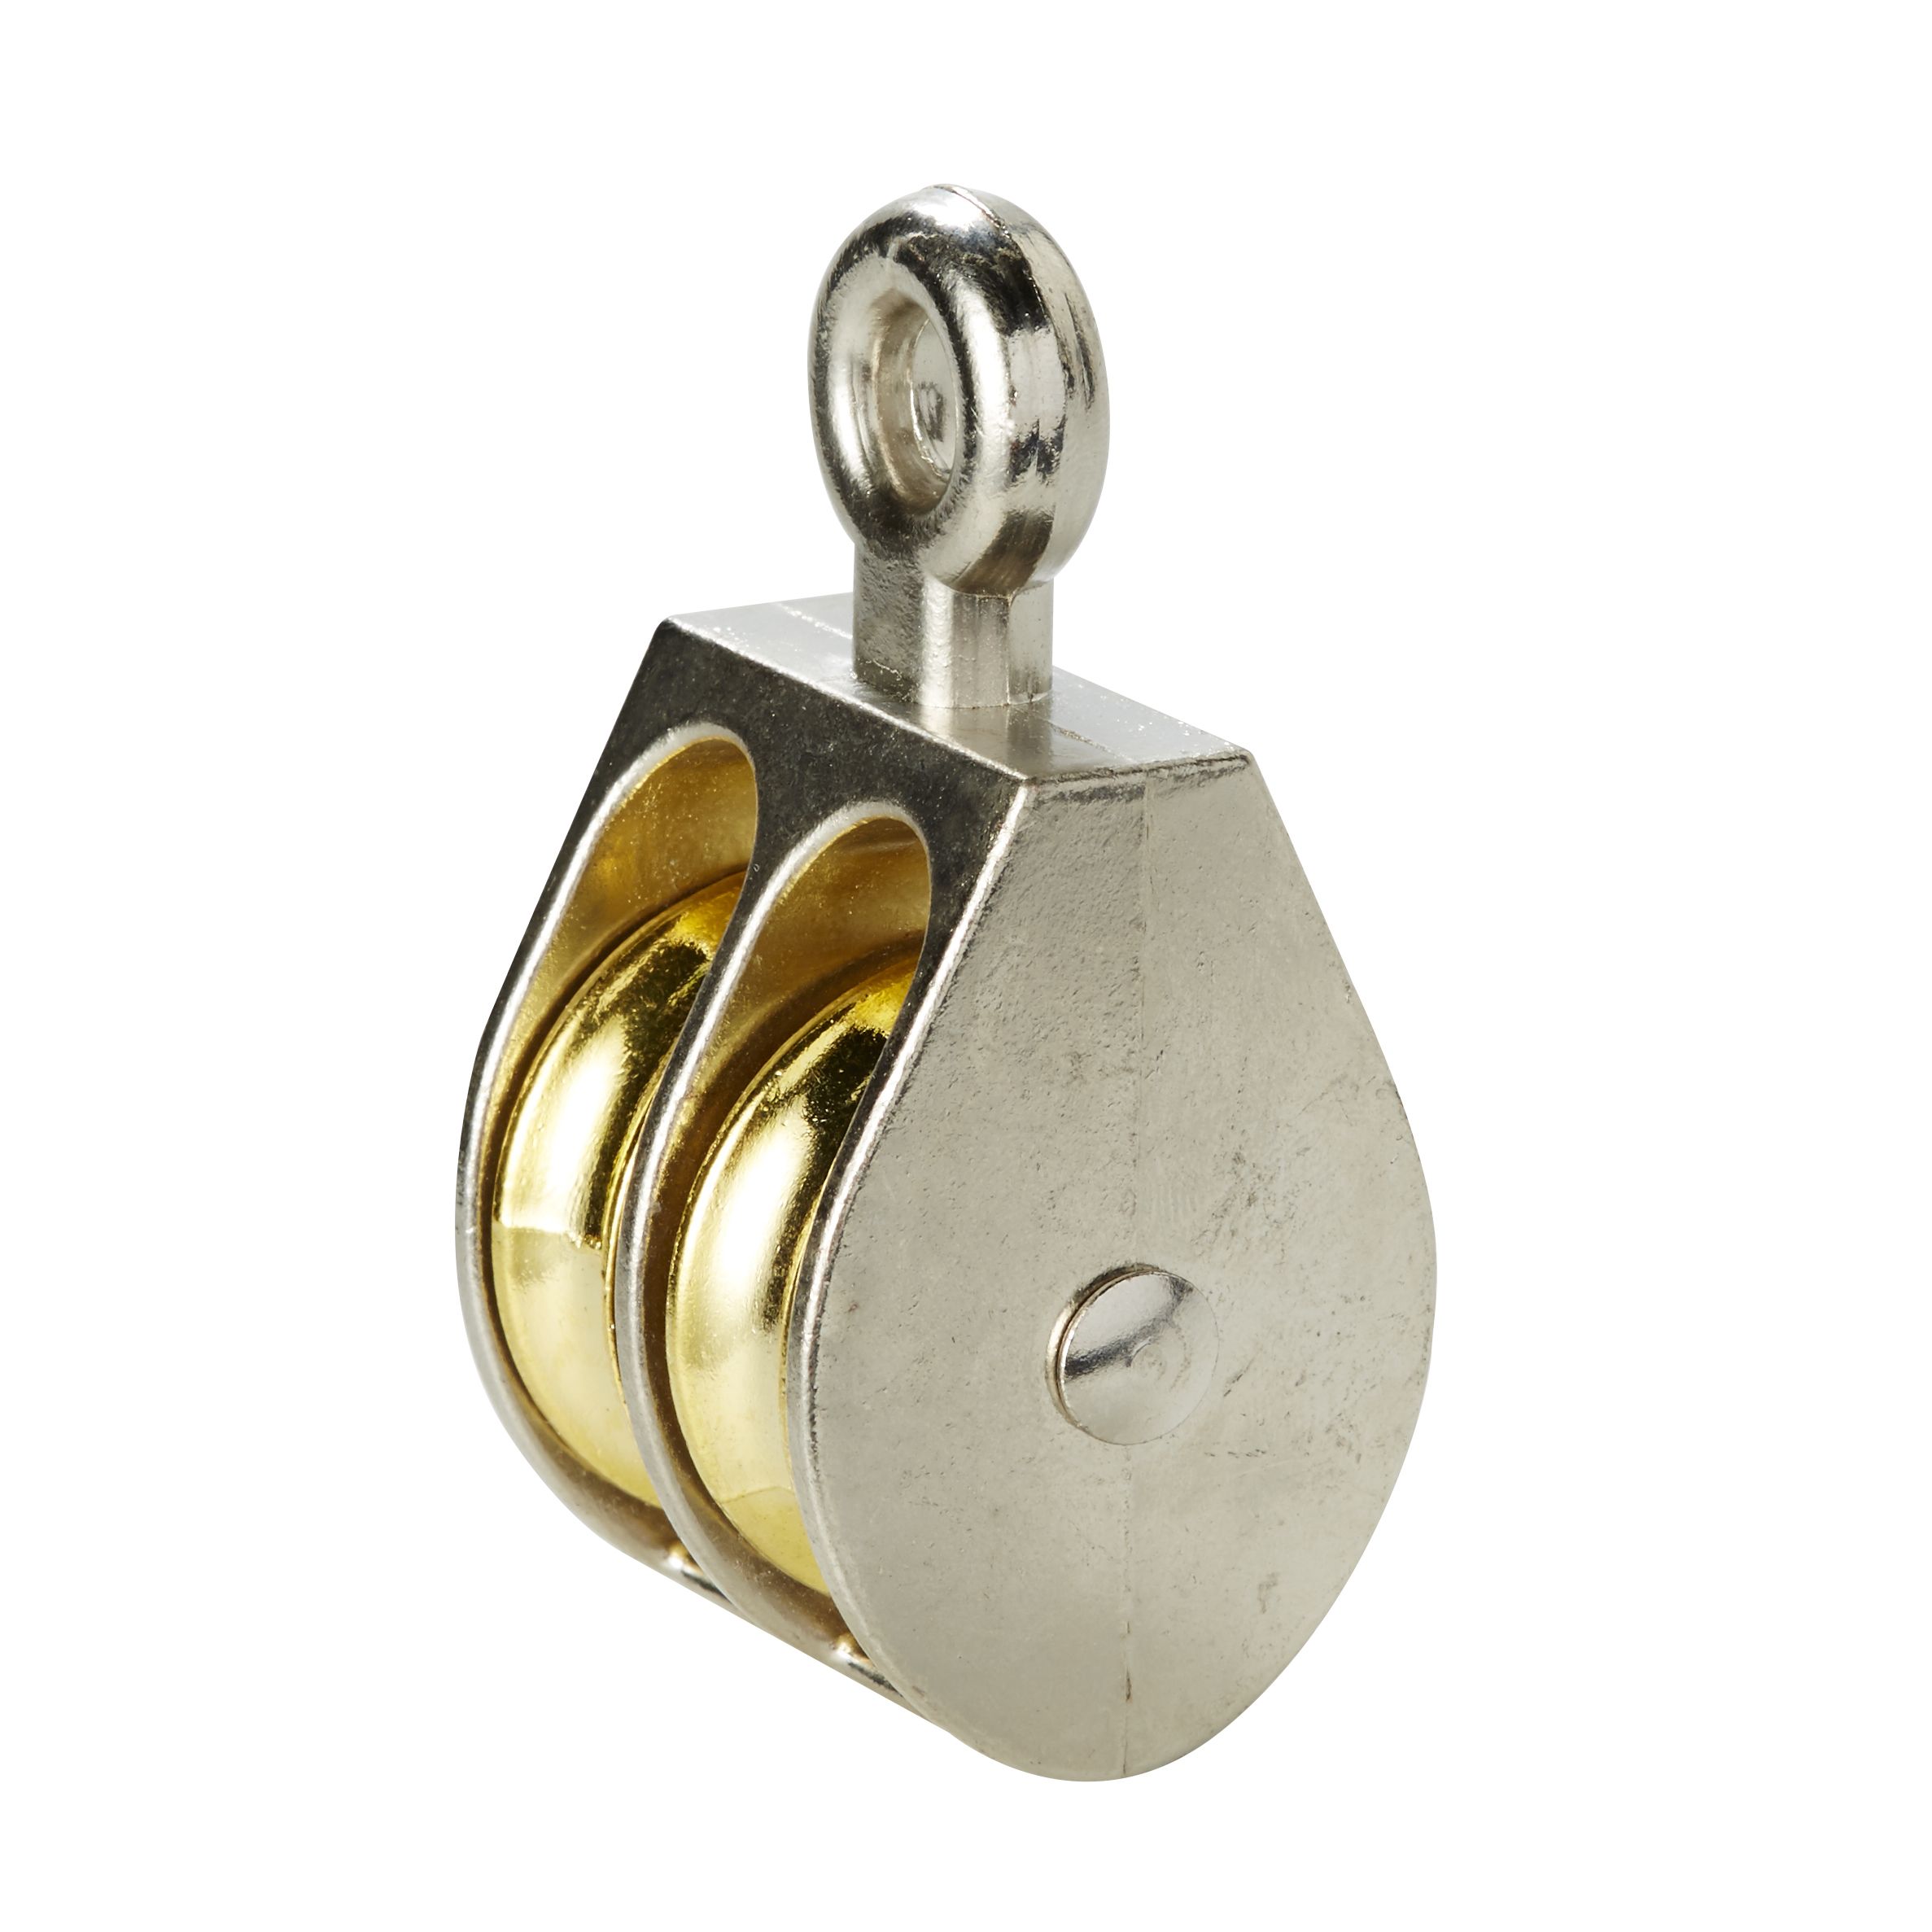 Diall Nickel & zinc-plated Grey & yellow 2 wheel Pulley, (Dia)24mm (Max)60kg